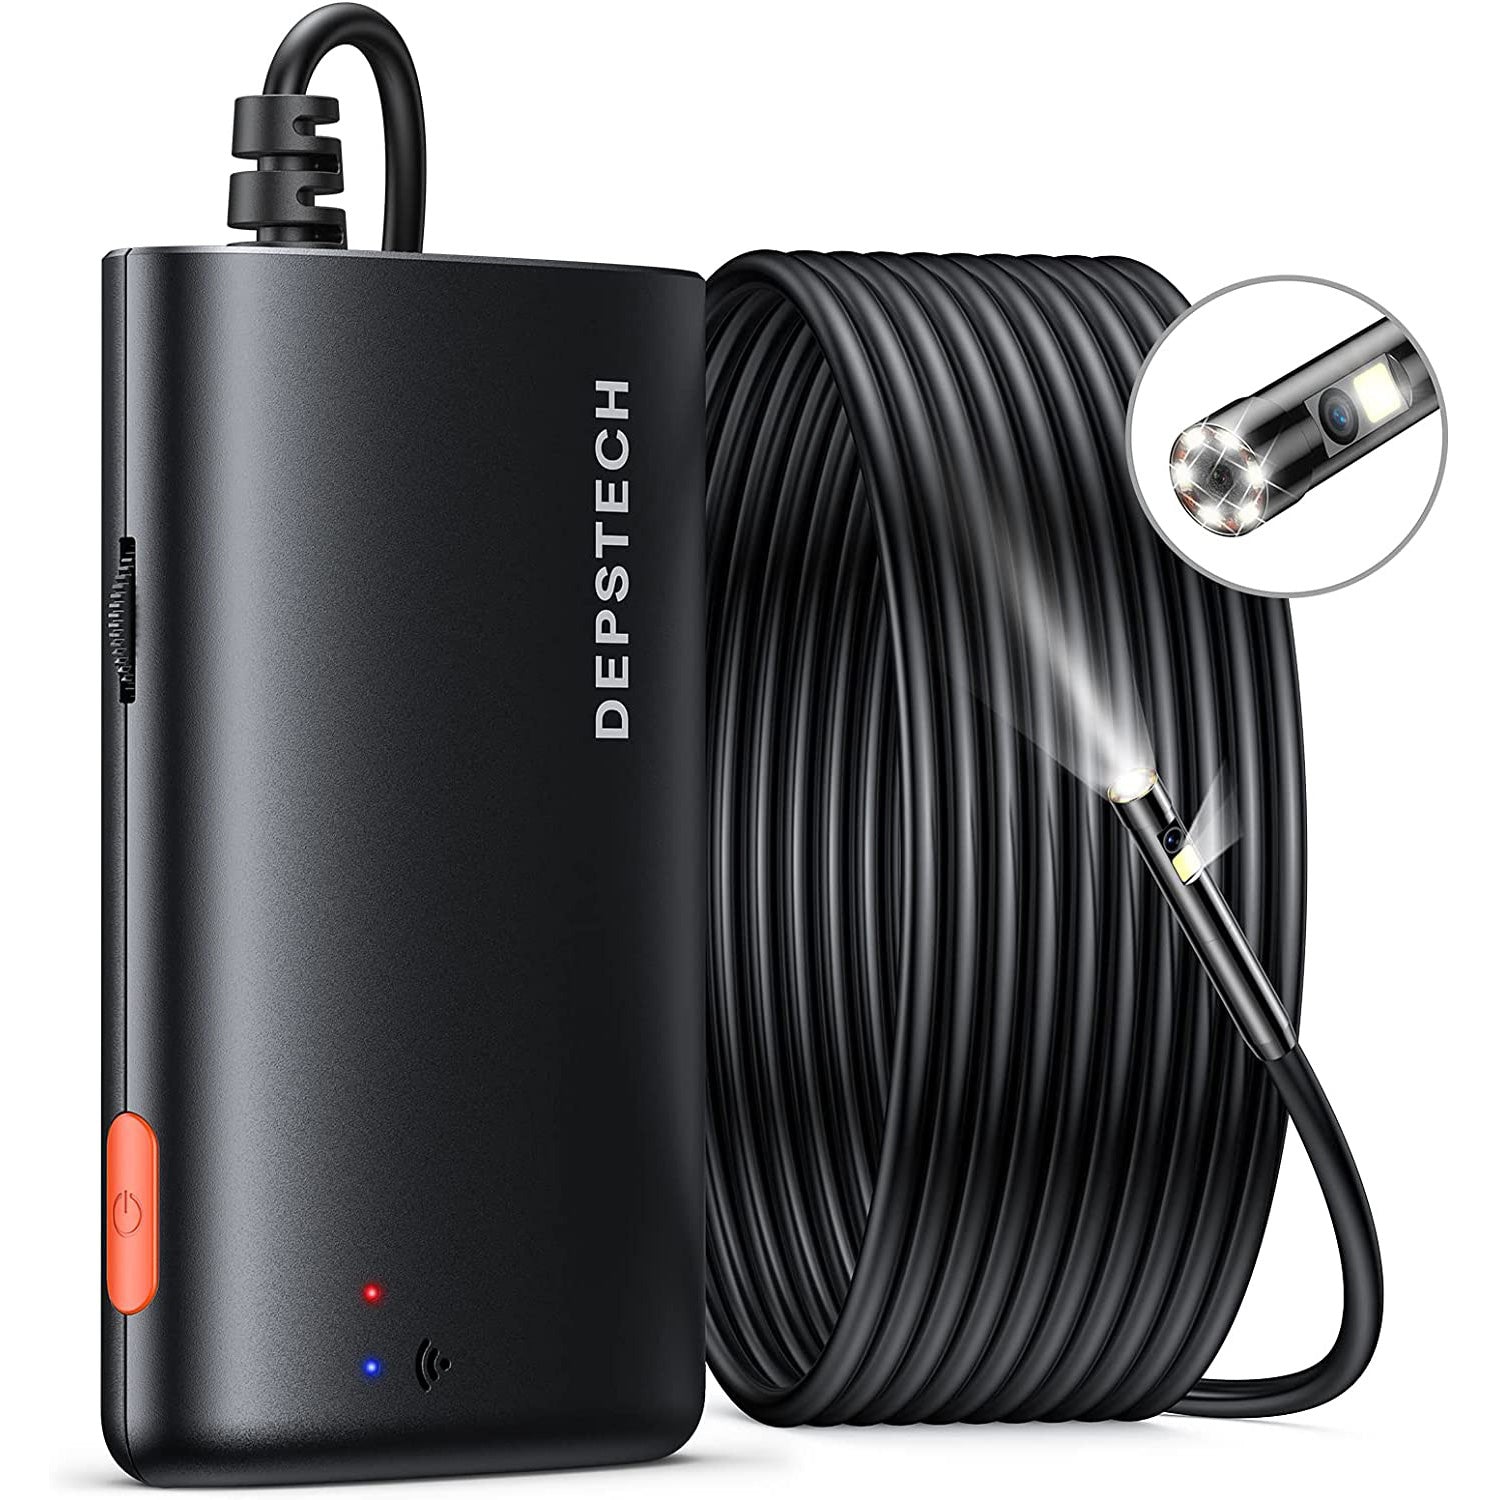 Depstech WF010 wifi endoscope (or more accurately, borescope